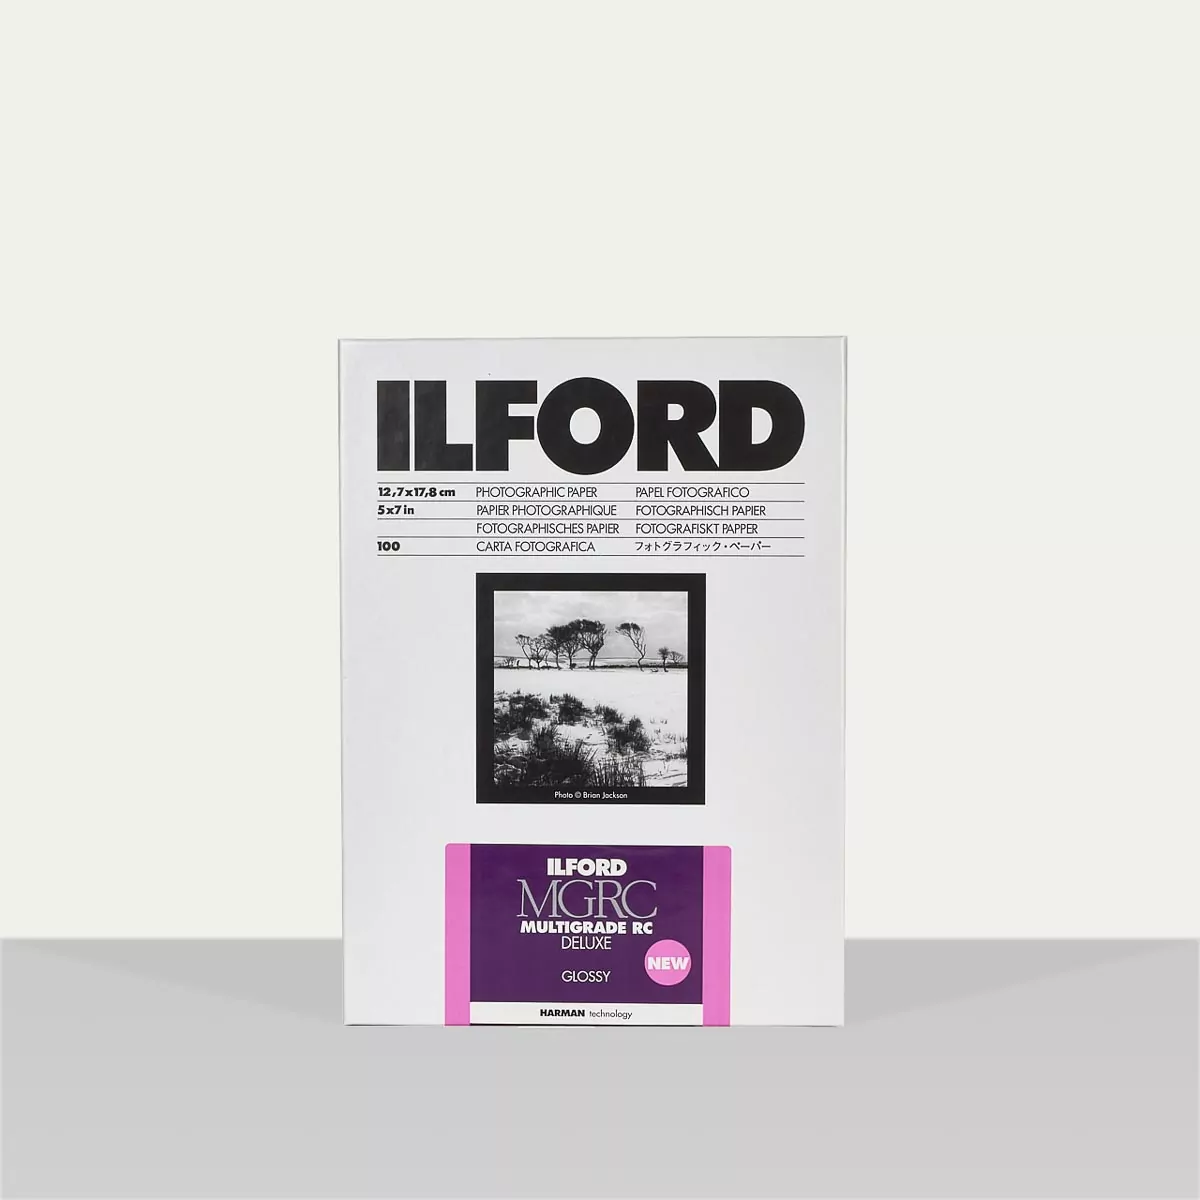 ILFORD MULTIGRADE RC DELUXE MGRCDL1M 12.7×17.8cm (100 sheets)